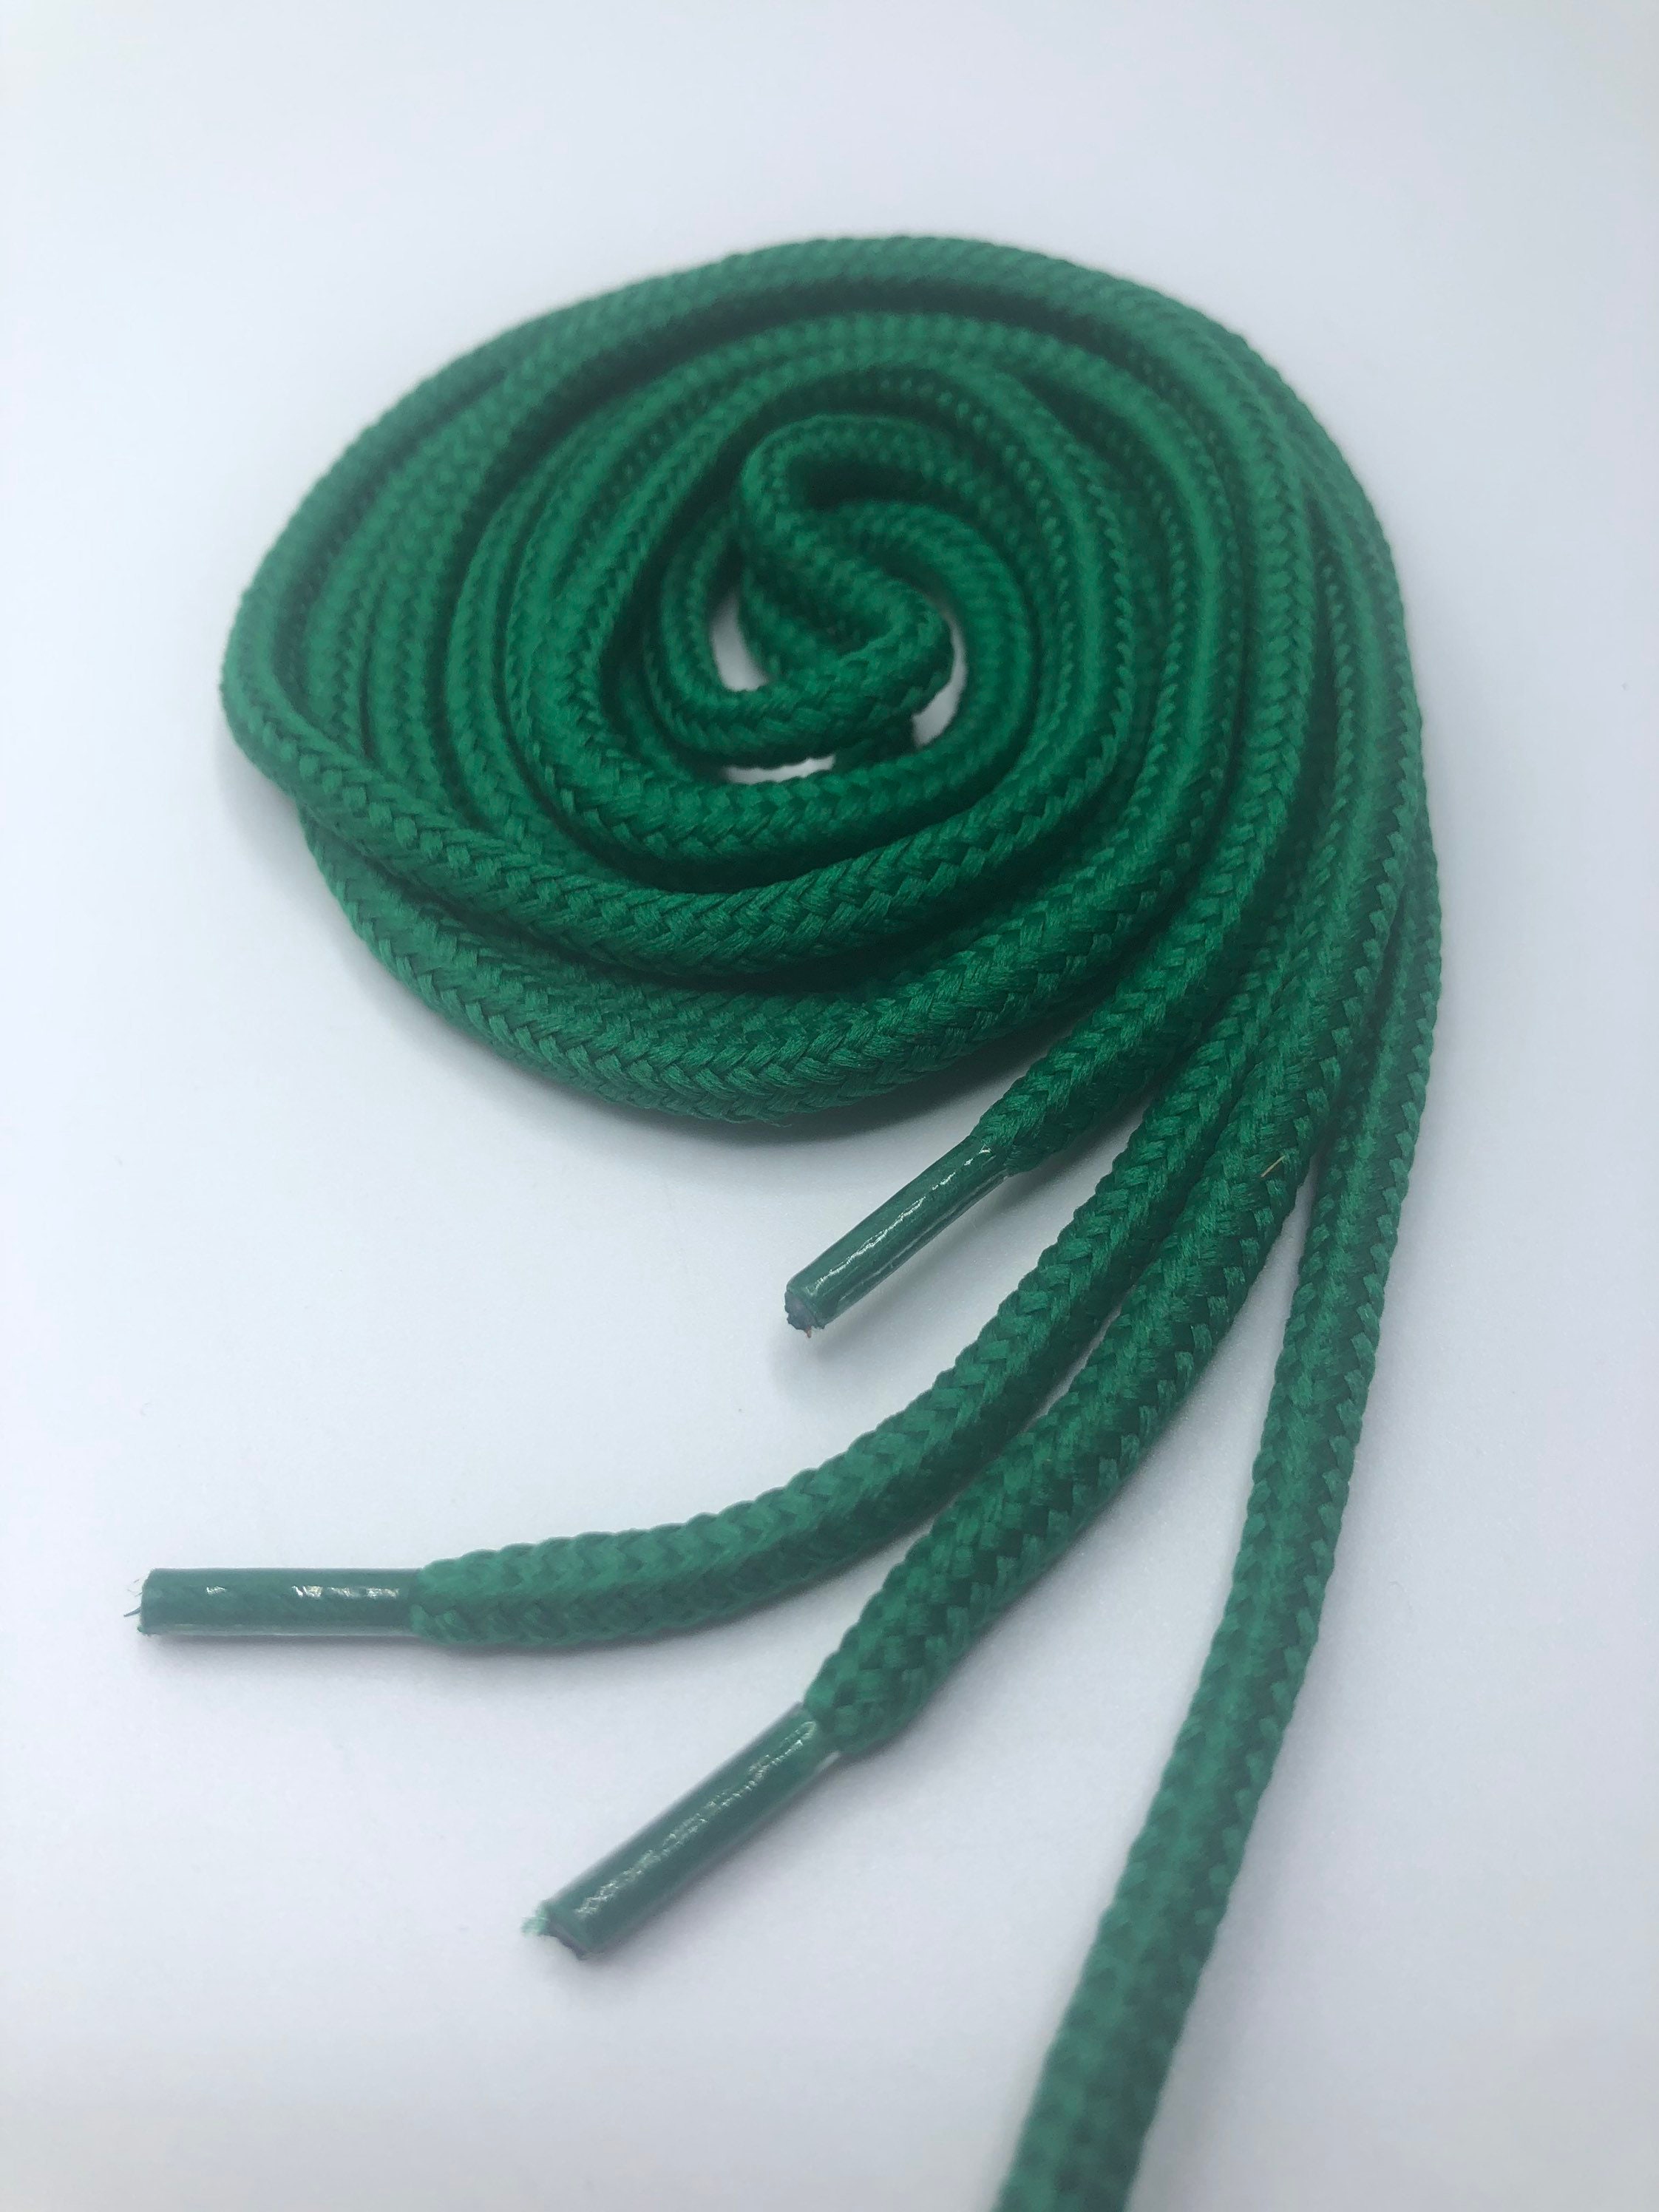 EMERALD GREEN ROUND CORD SHOE LACES STRONG THICK ROPE LACE SPORT